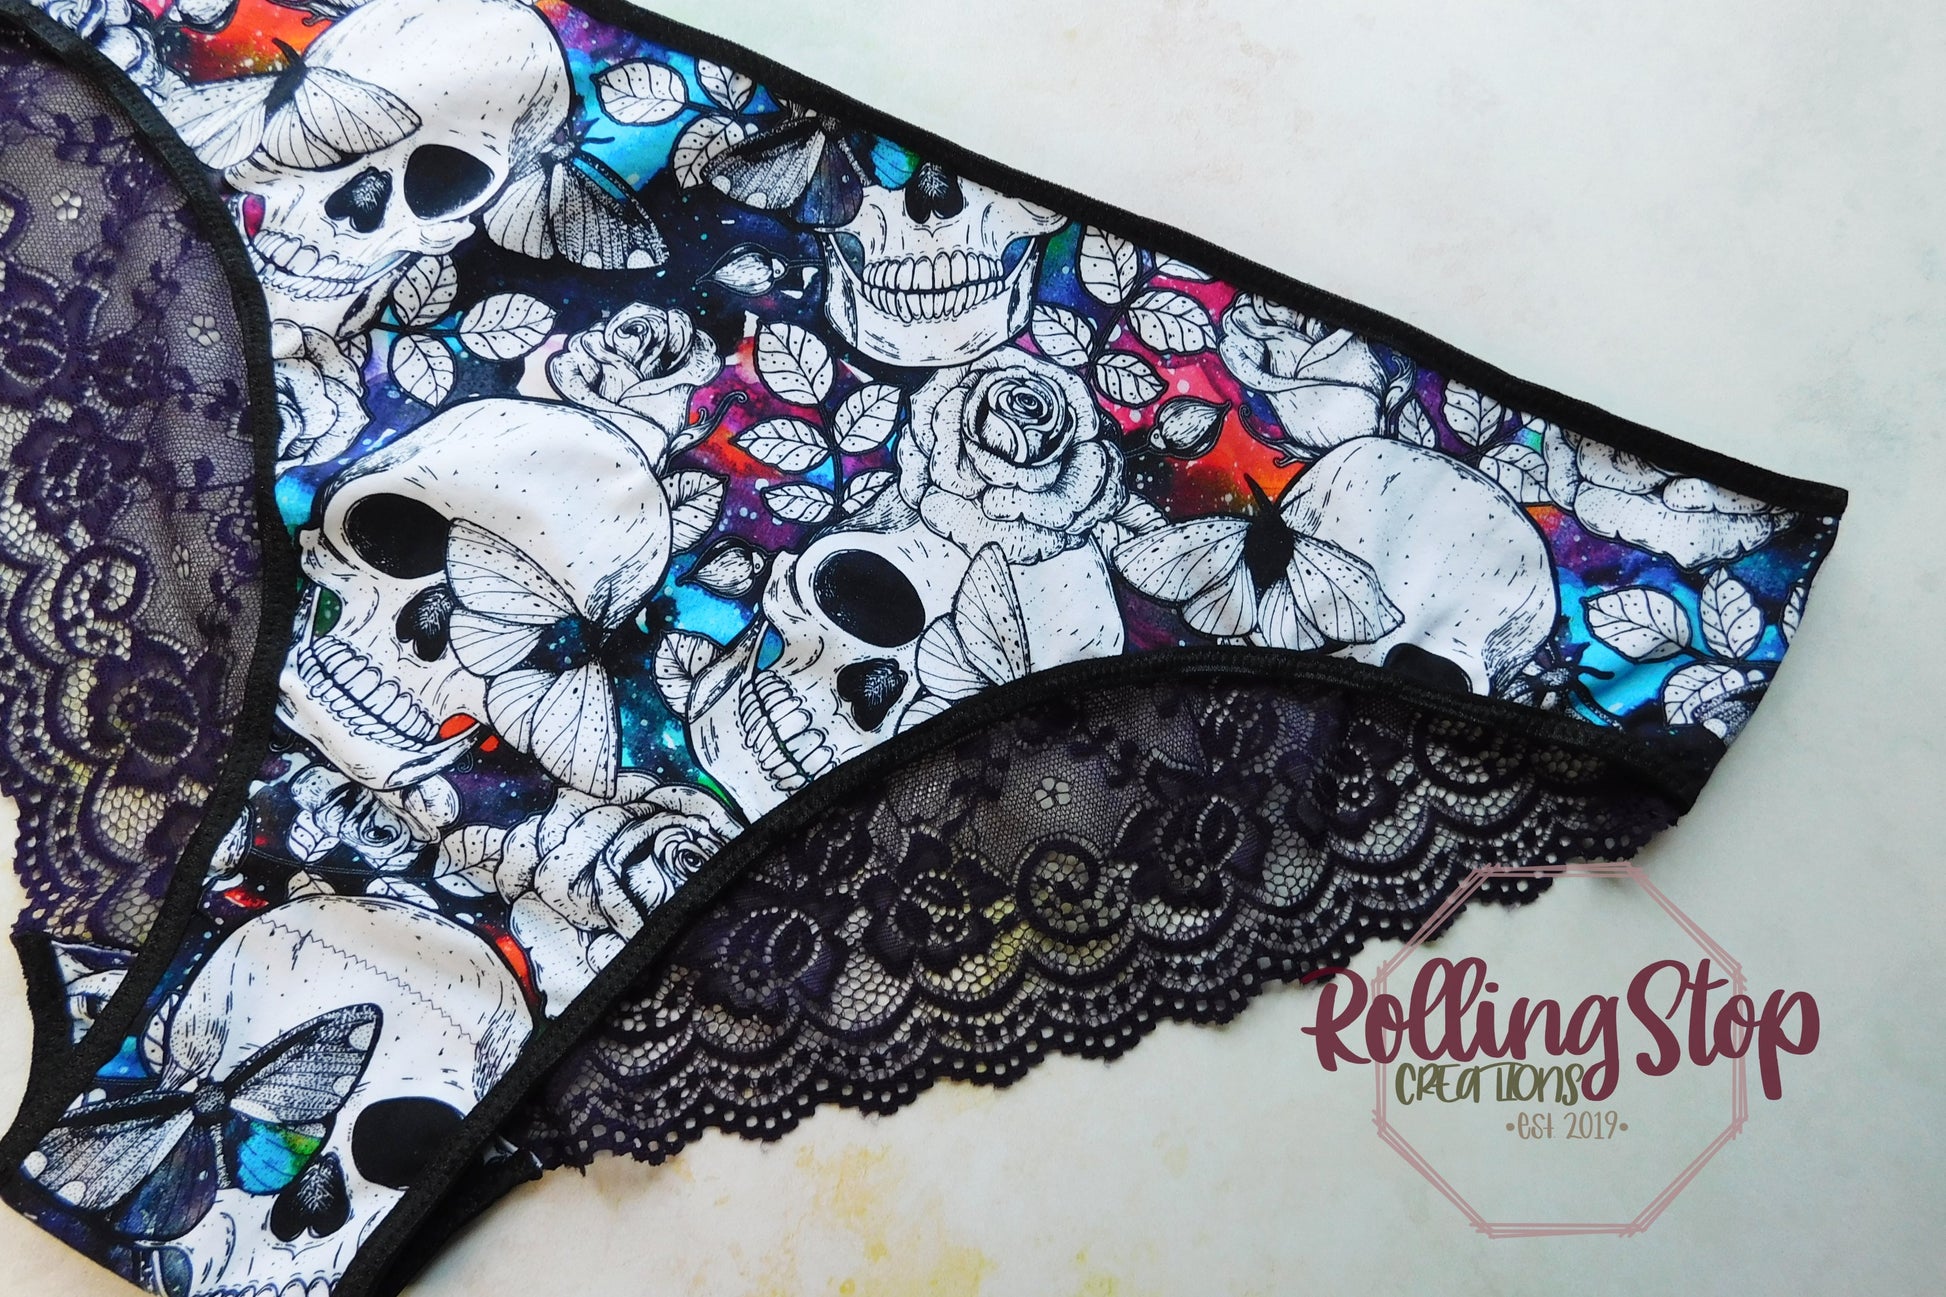 Royalty Skulls & Moths Lace Accent Pantydrawls by Rolling Stop Creations sold by Rolling Stop Creations Jundies - Lace